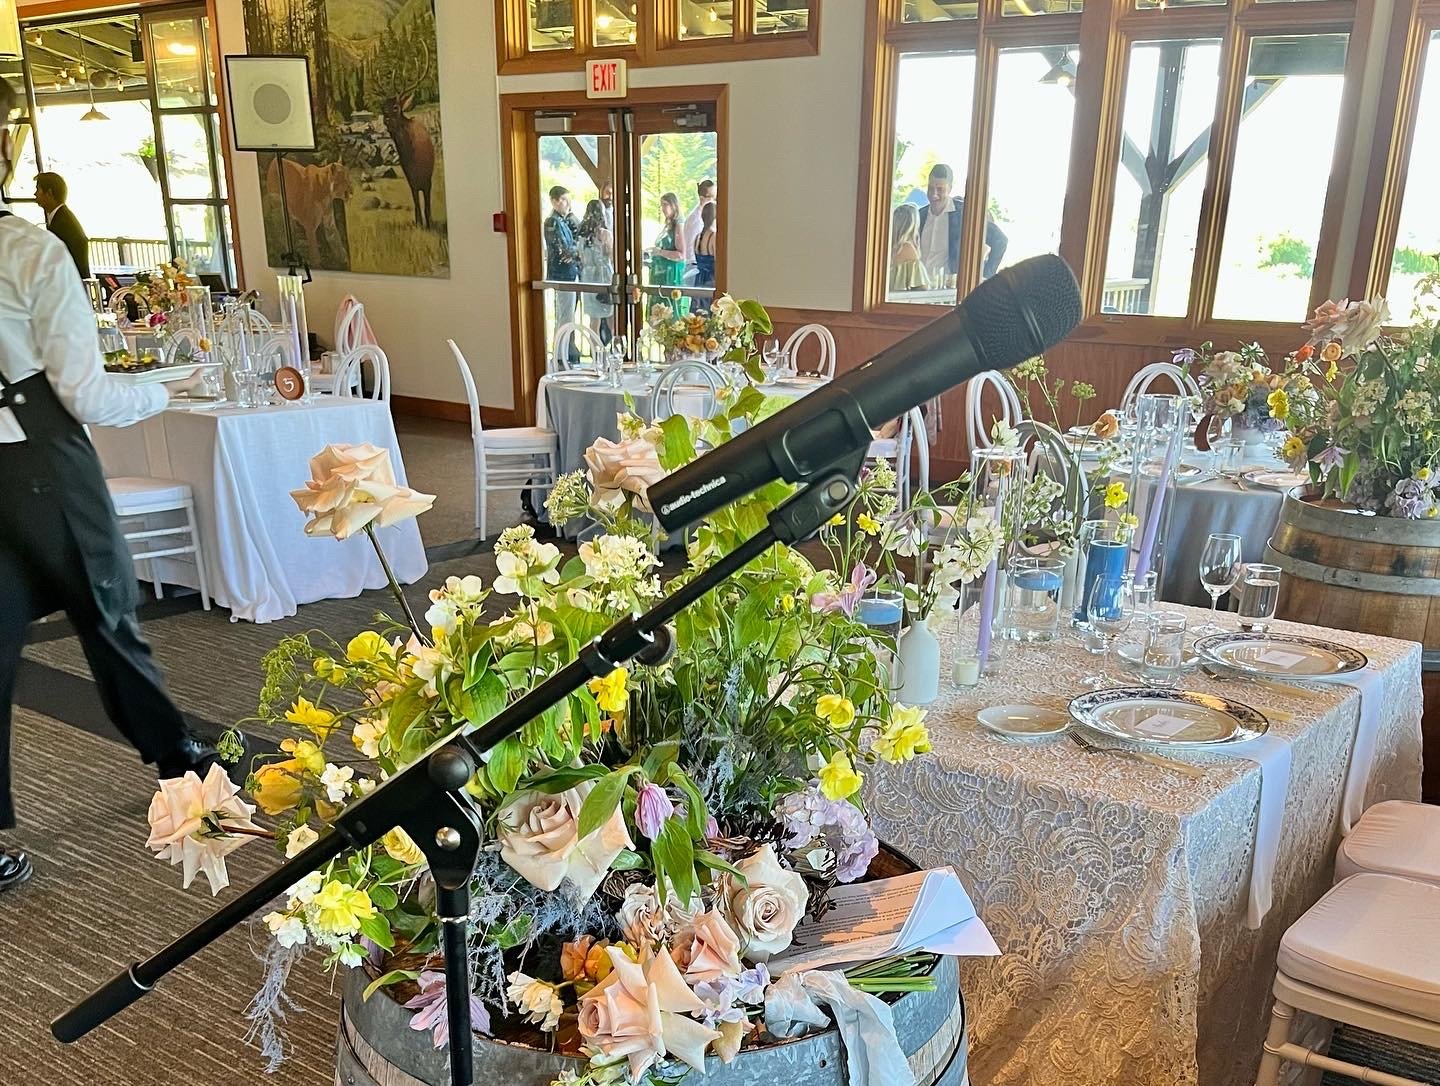 Wireless microphone set up for speeches at a private wedding reception at Church & State Wines, Victoria 2022